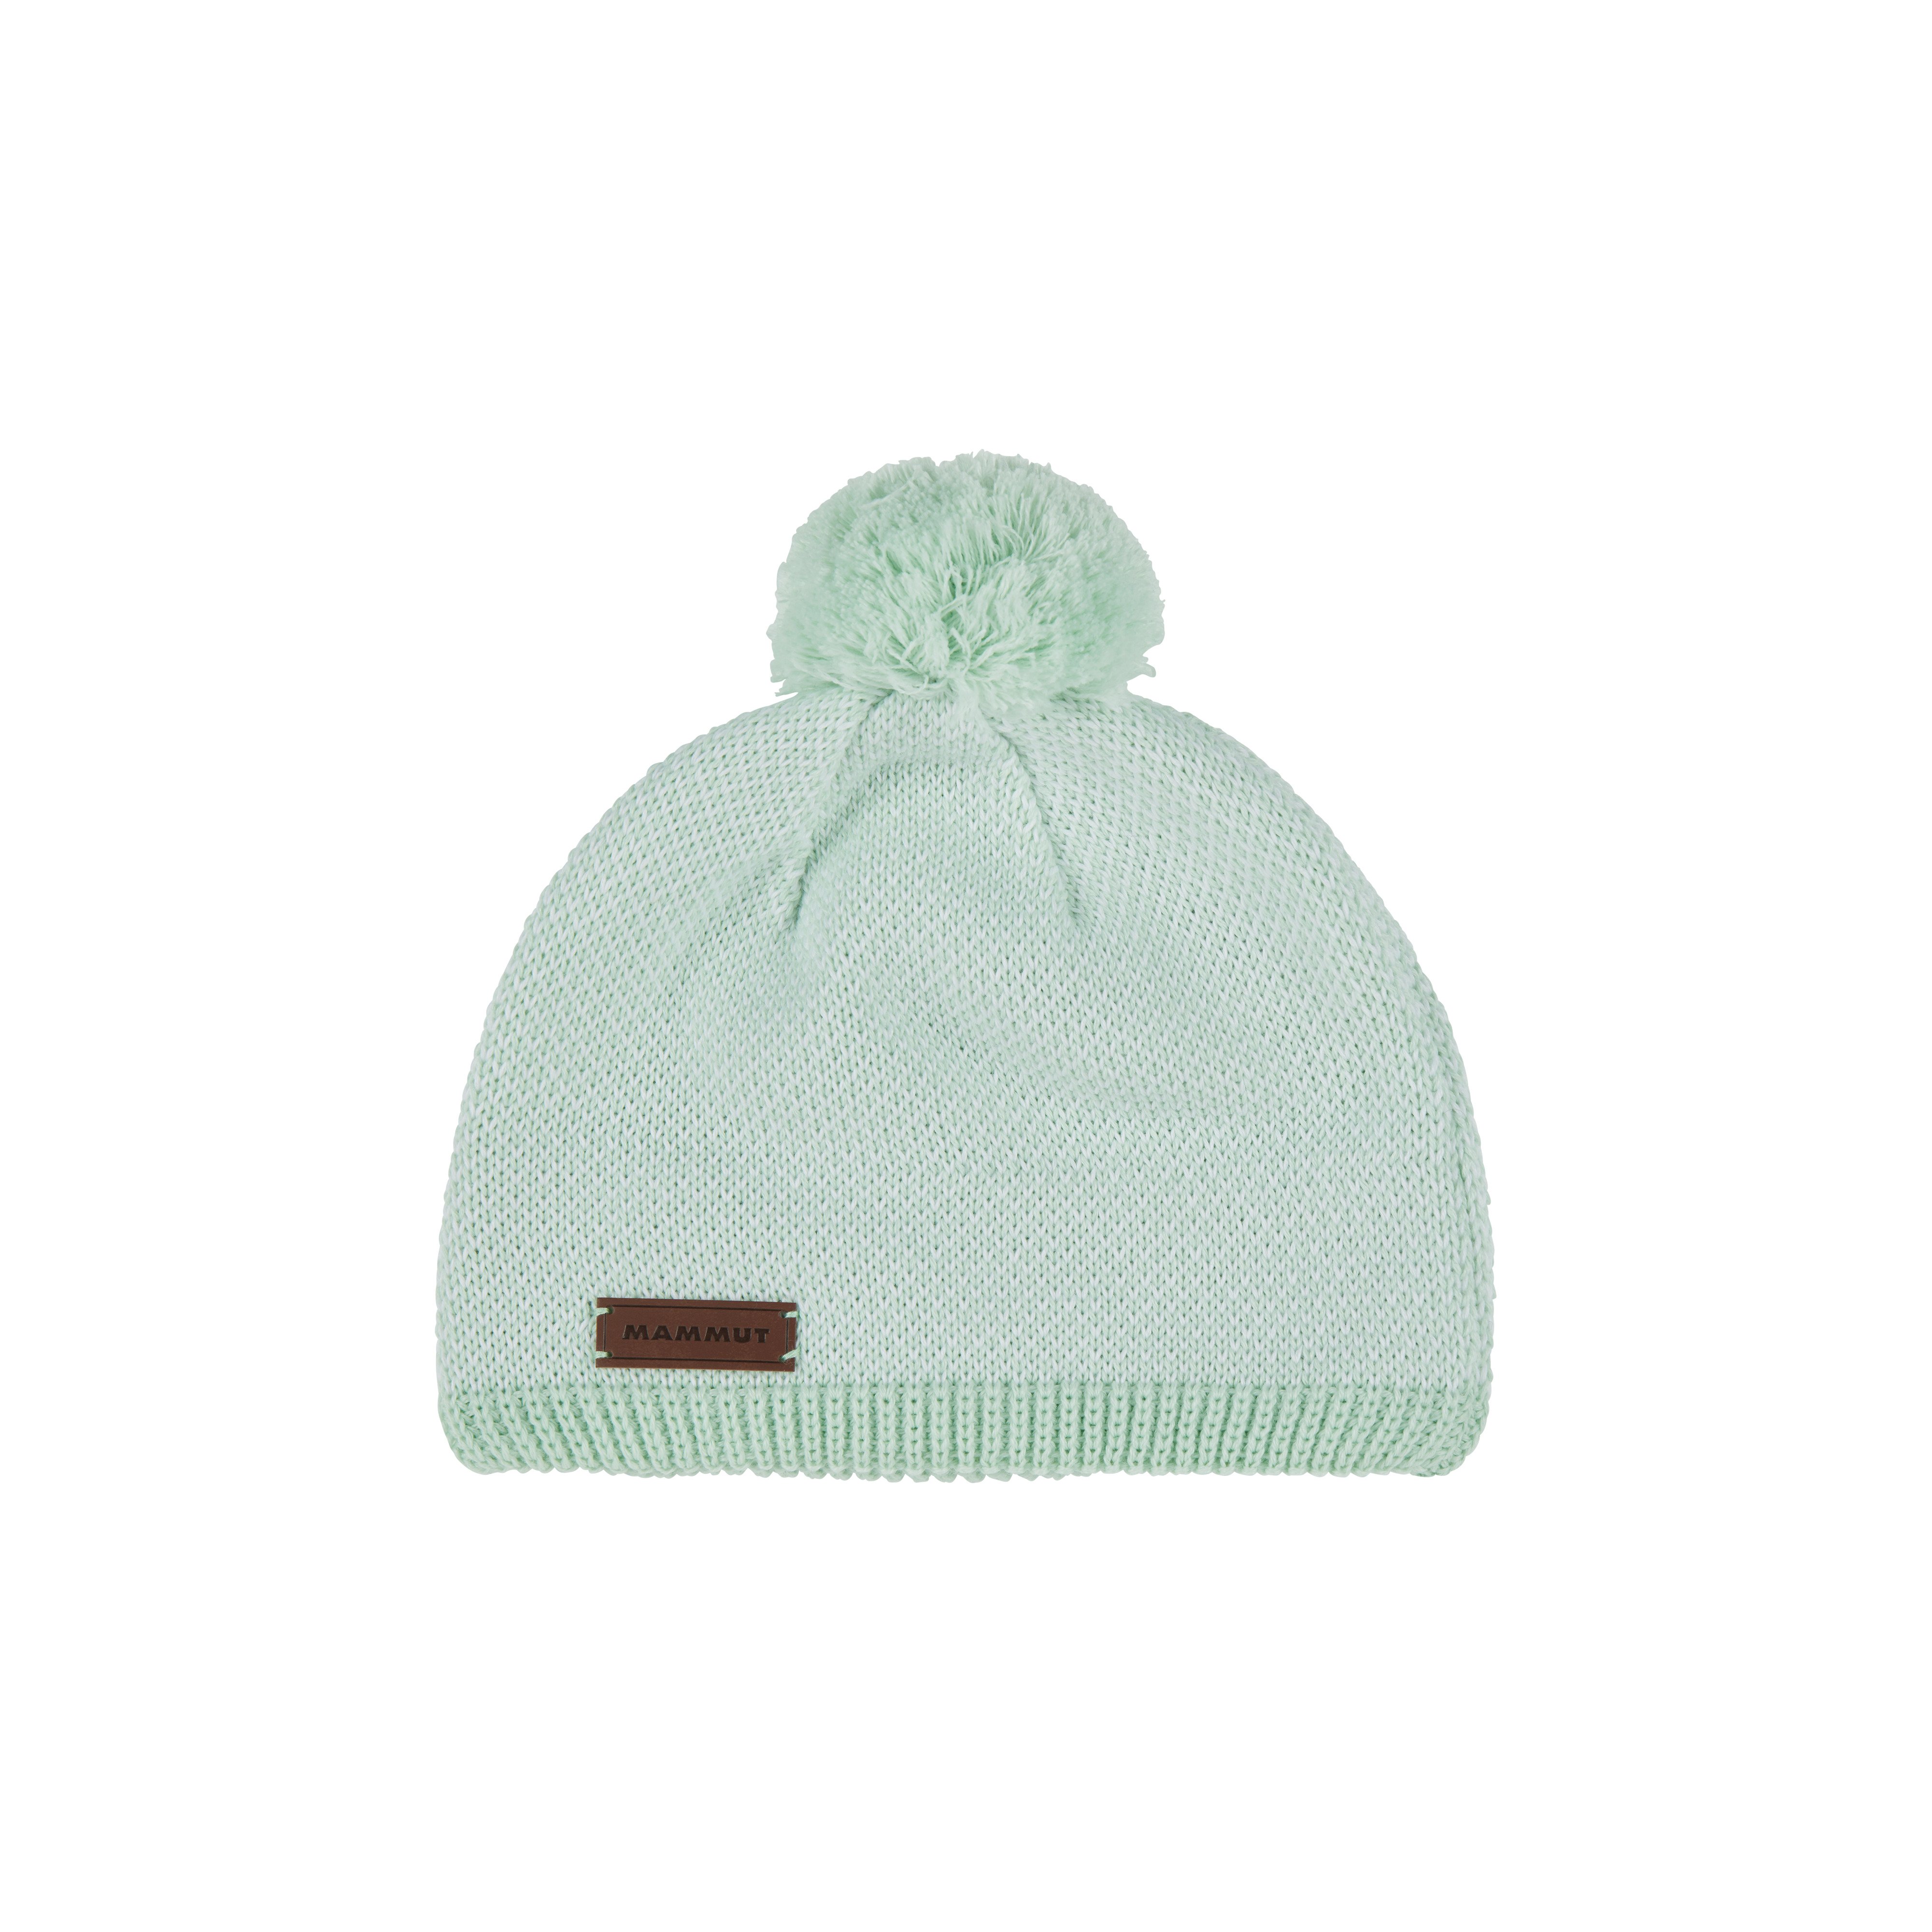 Snow Beanie - neo mint-white, one size product image